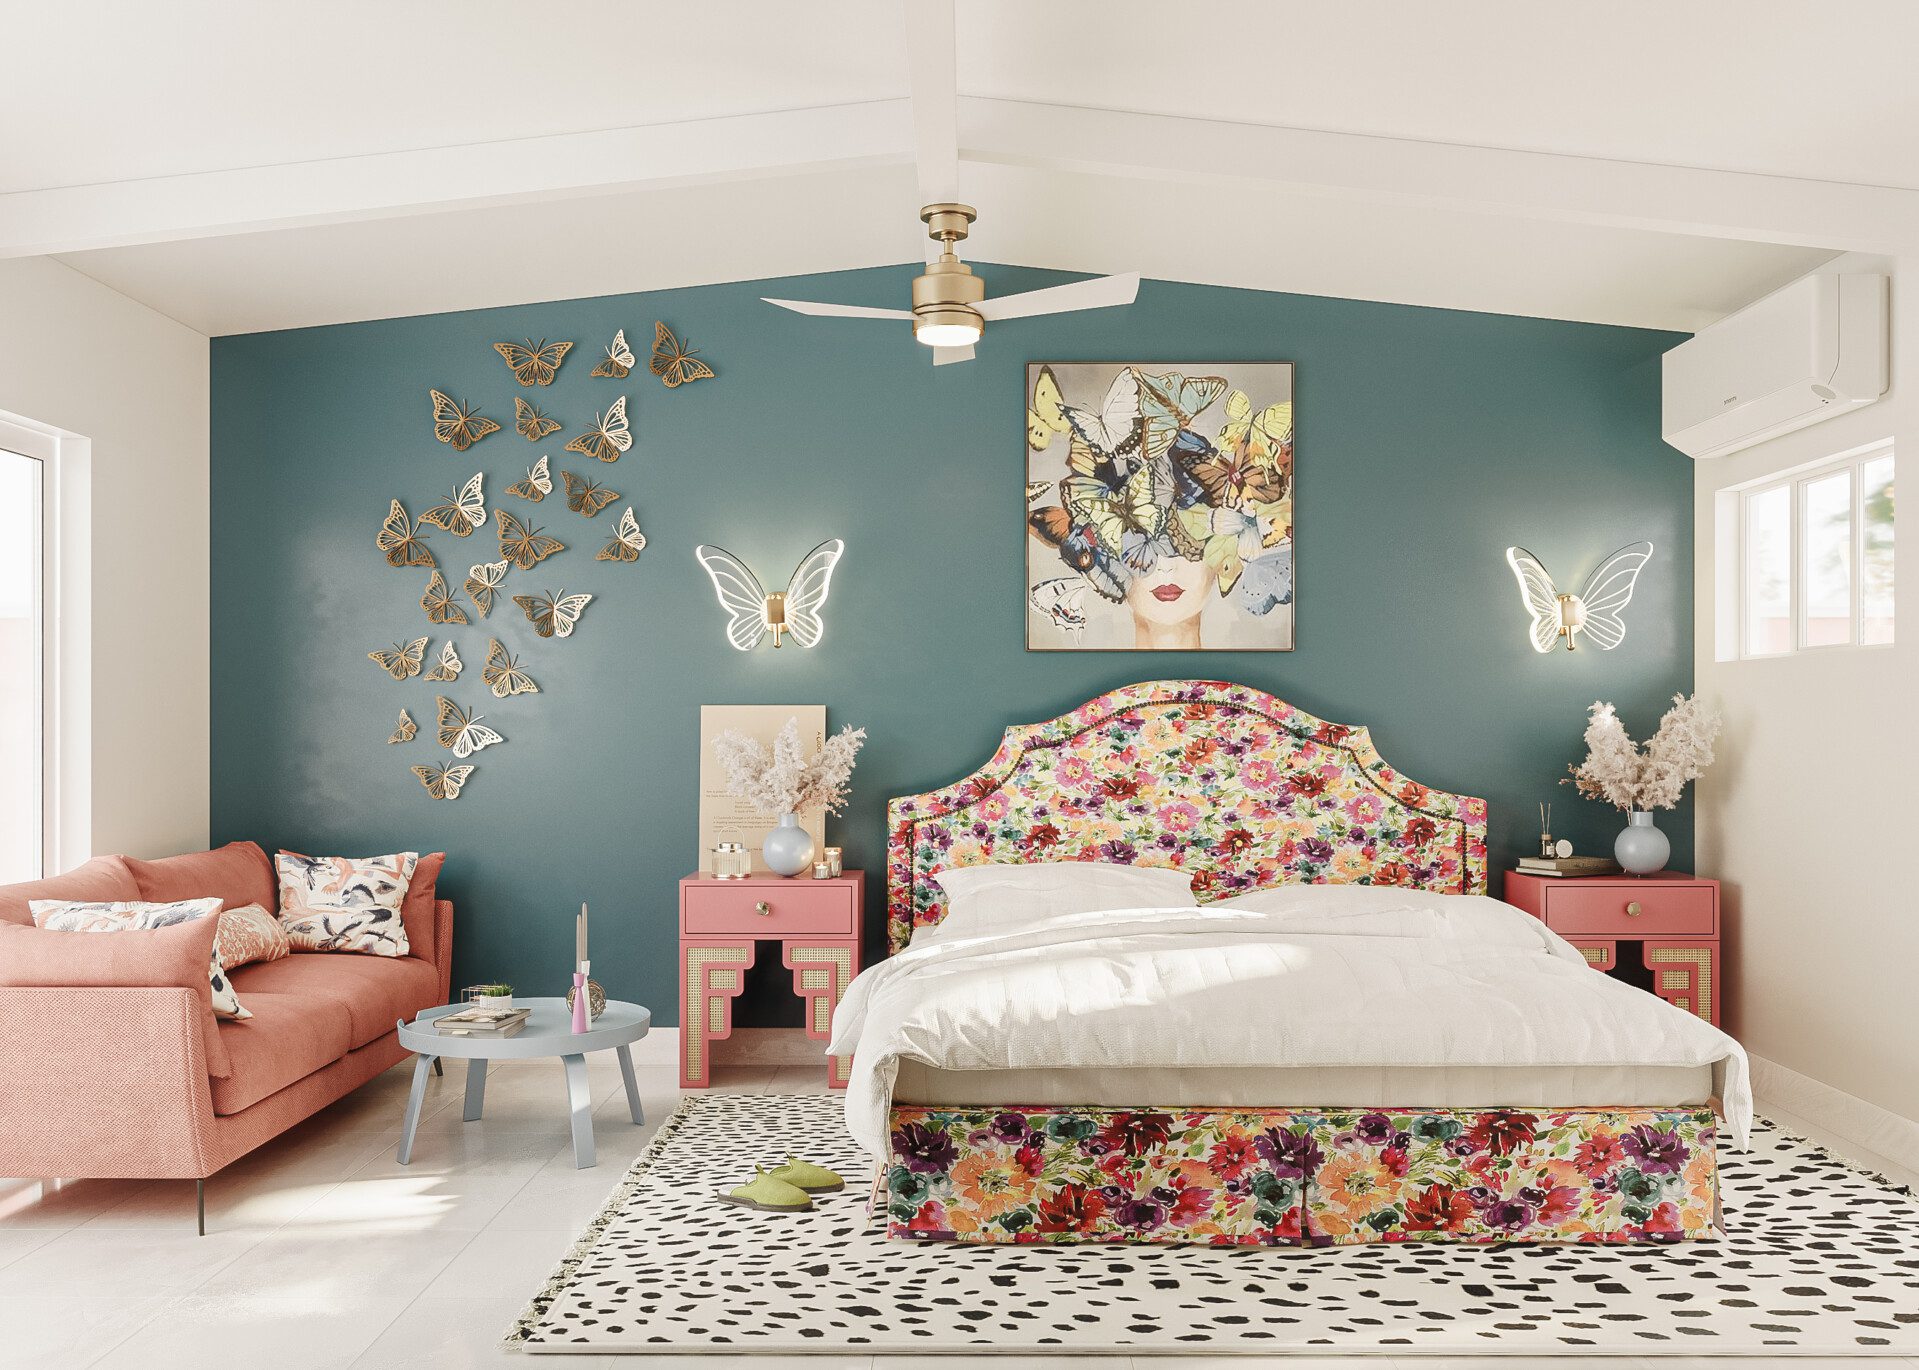 A vibrant bedroom with a floral upholstered bed, teal walls adorned with butterfly decorations and artwork, a coral sofa, pink bedside tables, and a polka-dotted area rug.